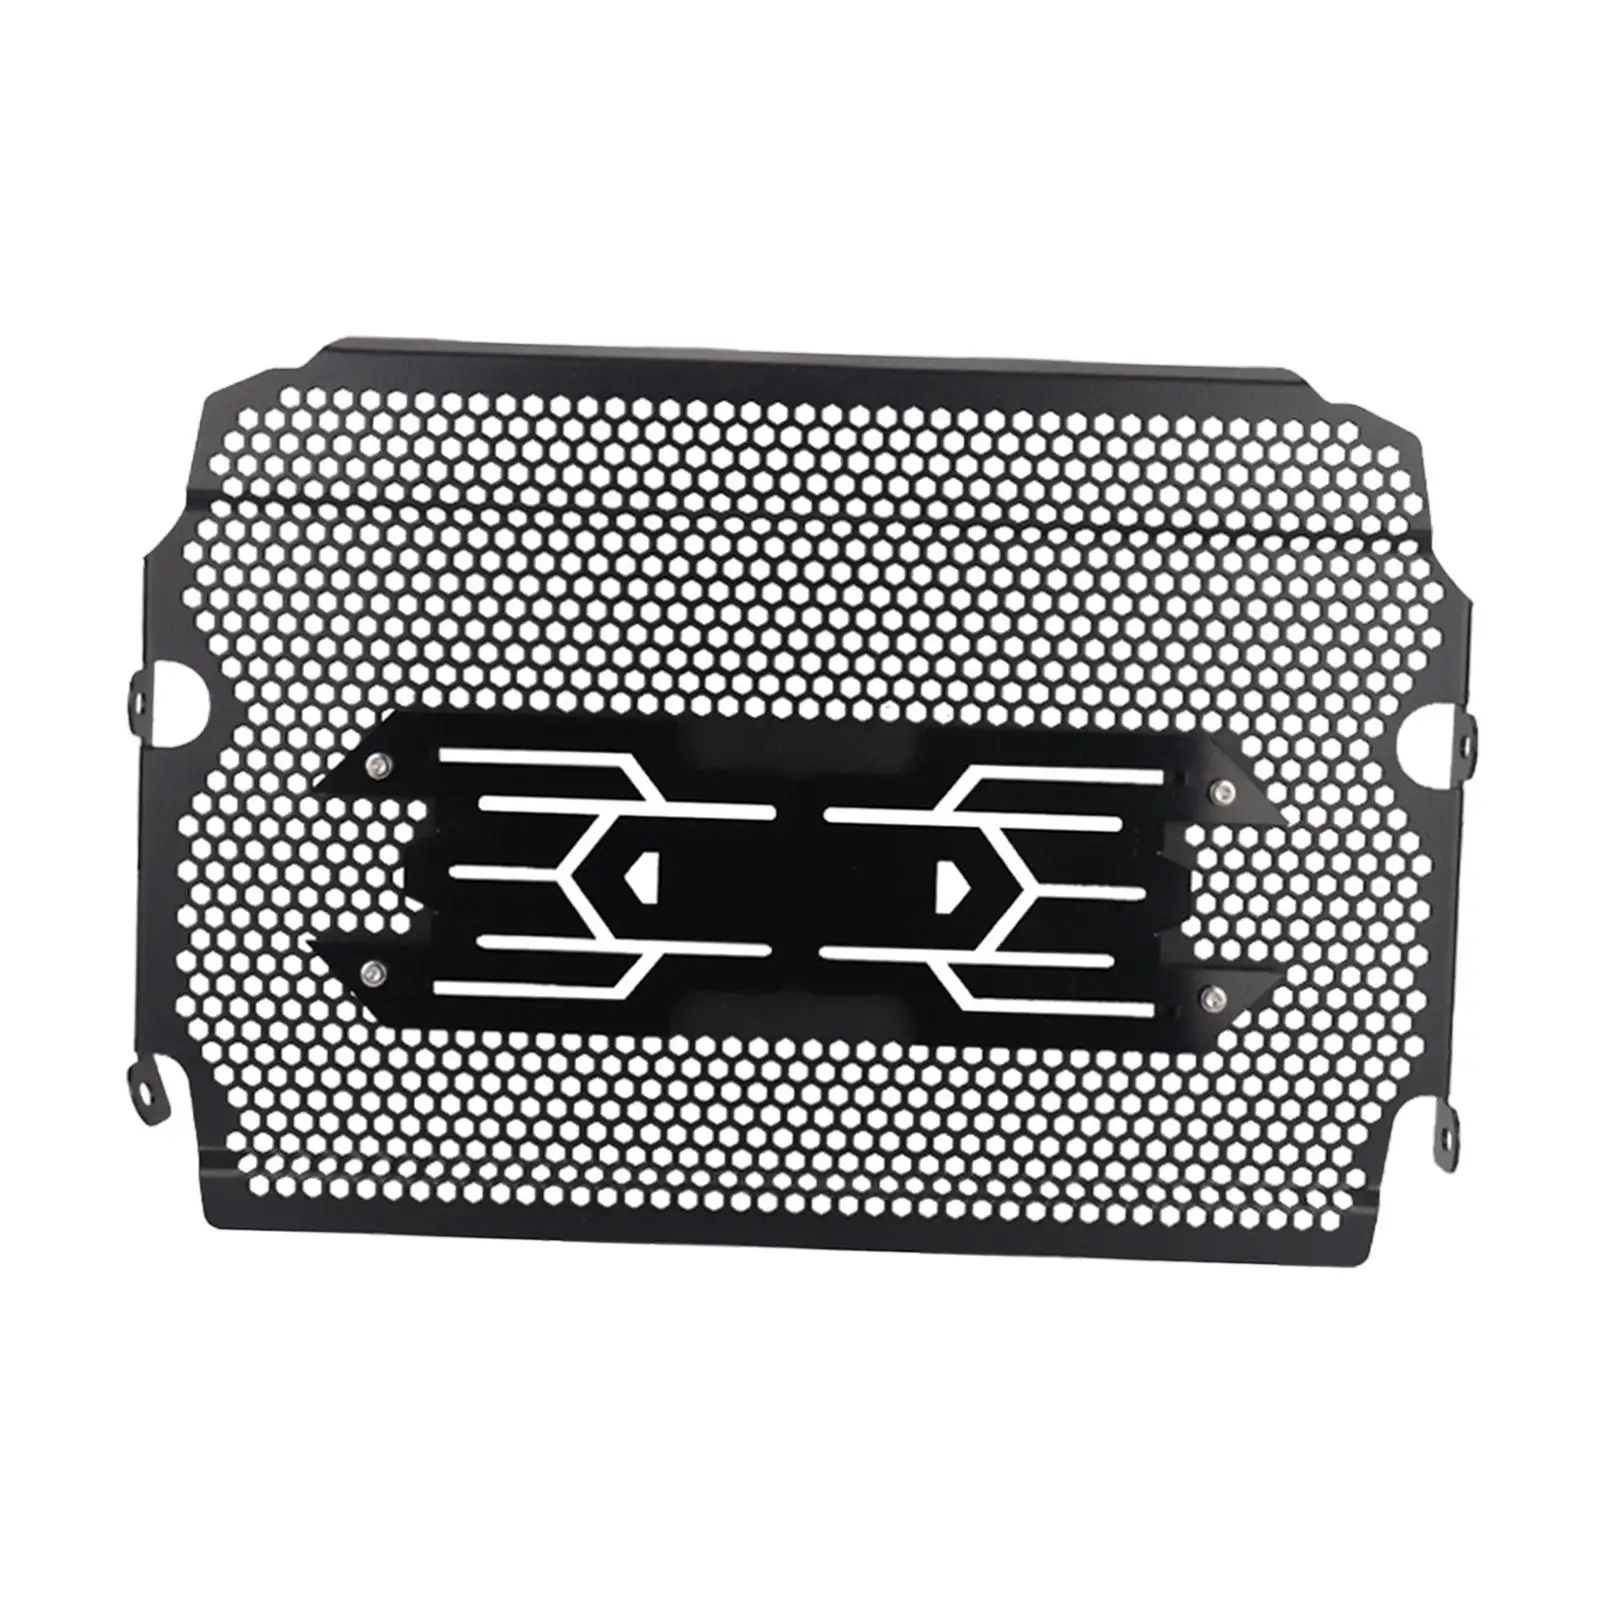 Motorcycle Radiator Grille Guard Protector Cover Black Mesh Engine Water Tank Shield Cover for Yzf R7 Accessory